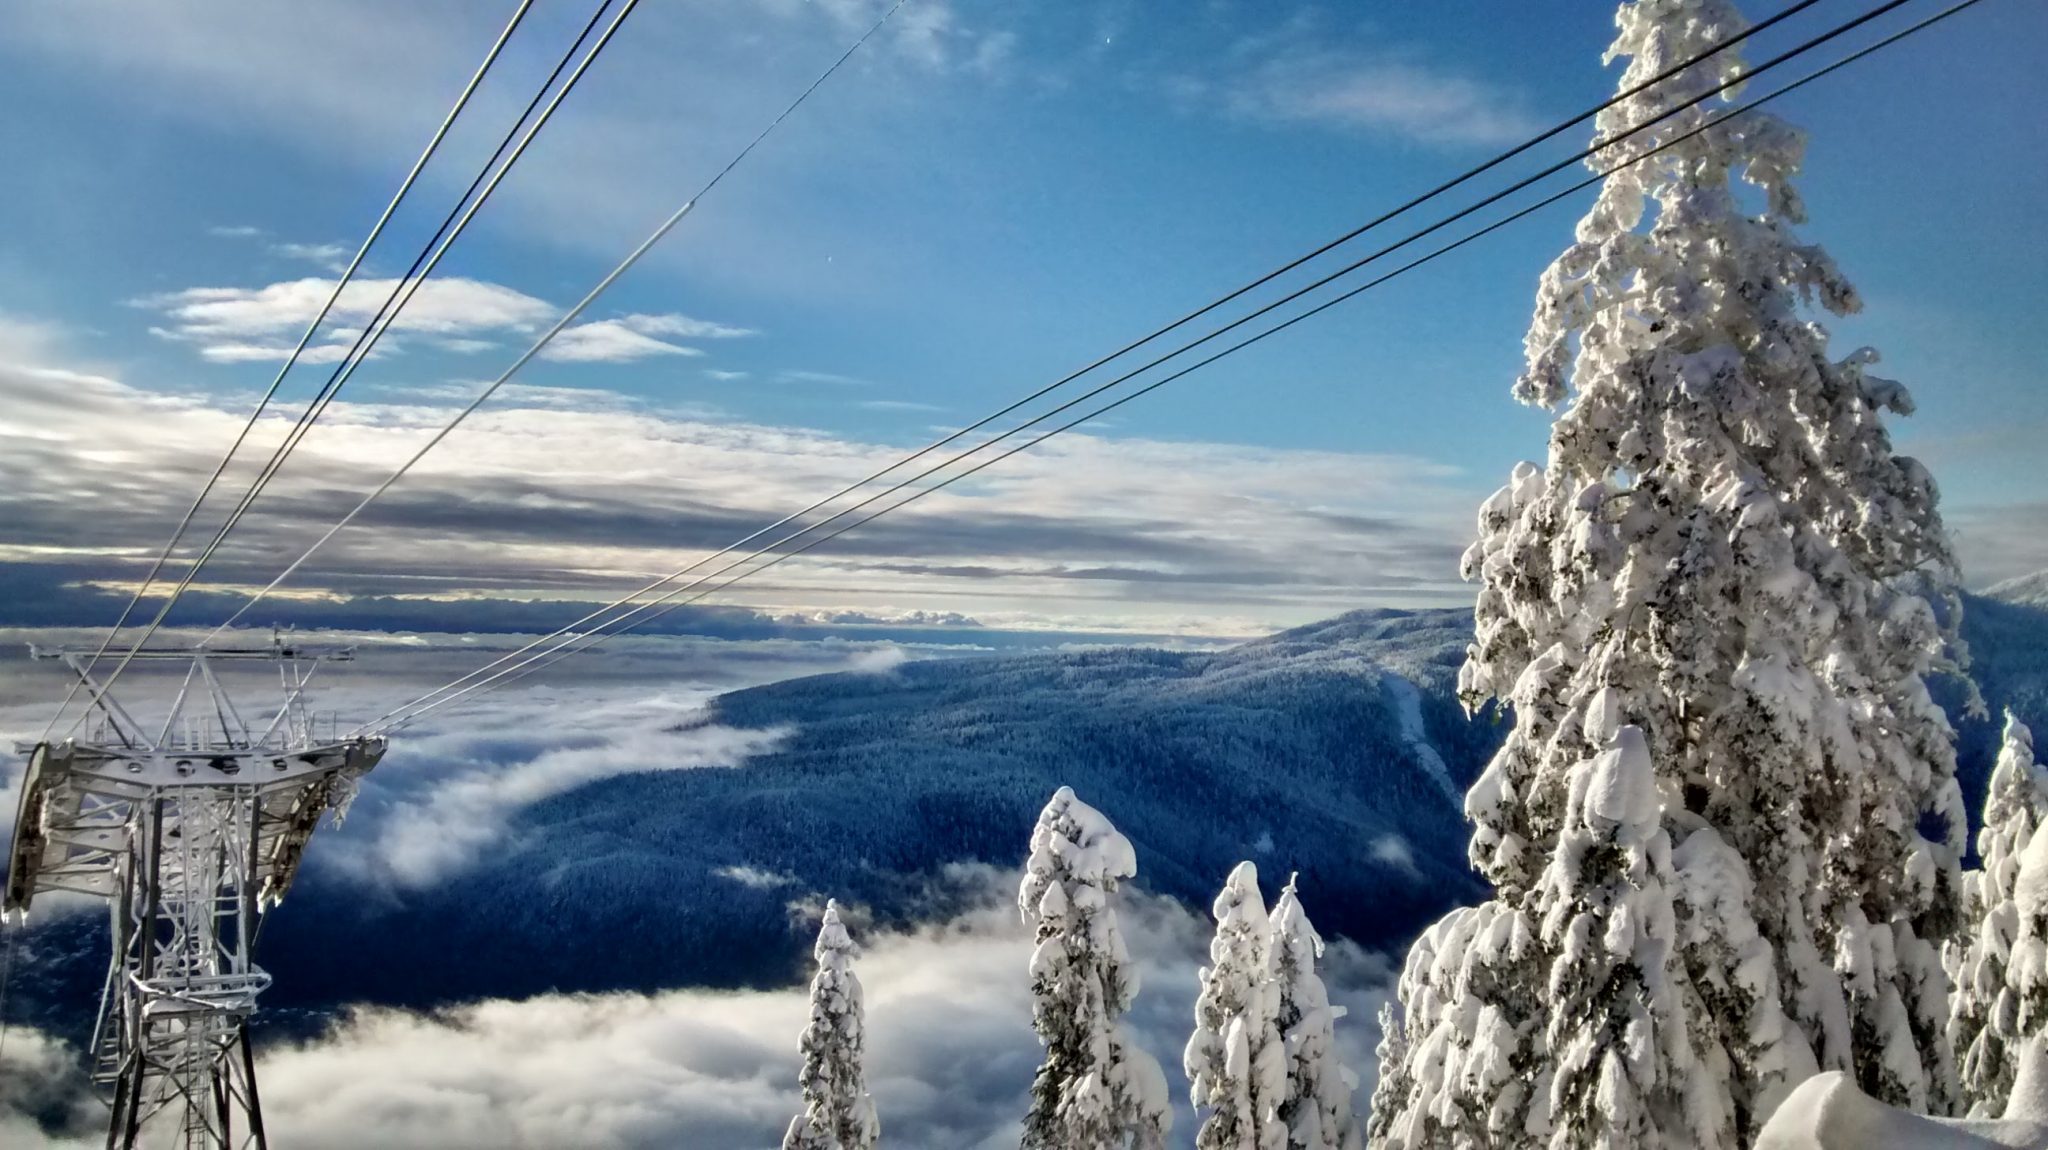 Snow covered trees and cables in the foreground. Clouds and forested hills below in the background on a partly cloudy day.